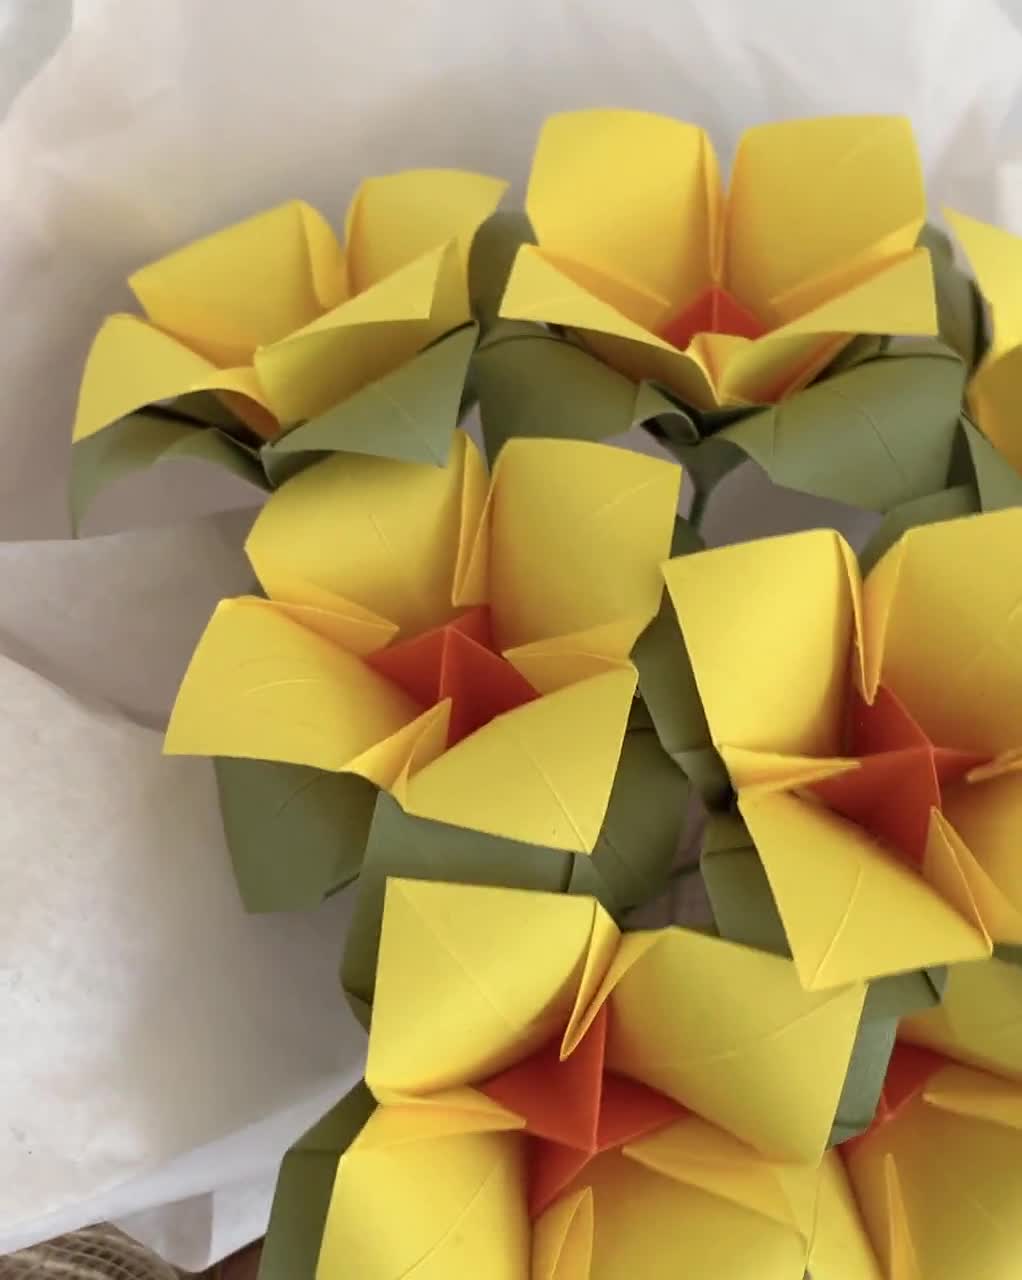 15+ Origami DIY Kits to Help You Master the Ancient Art of Paper-Folding